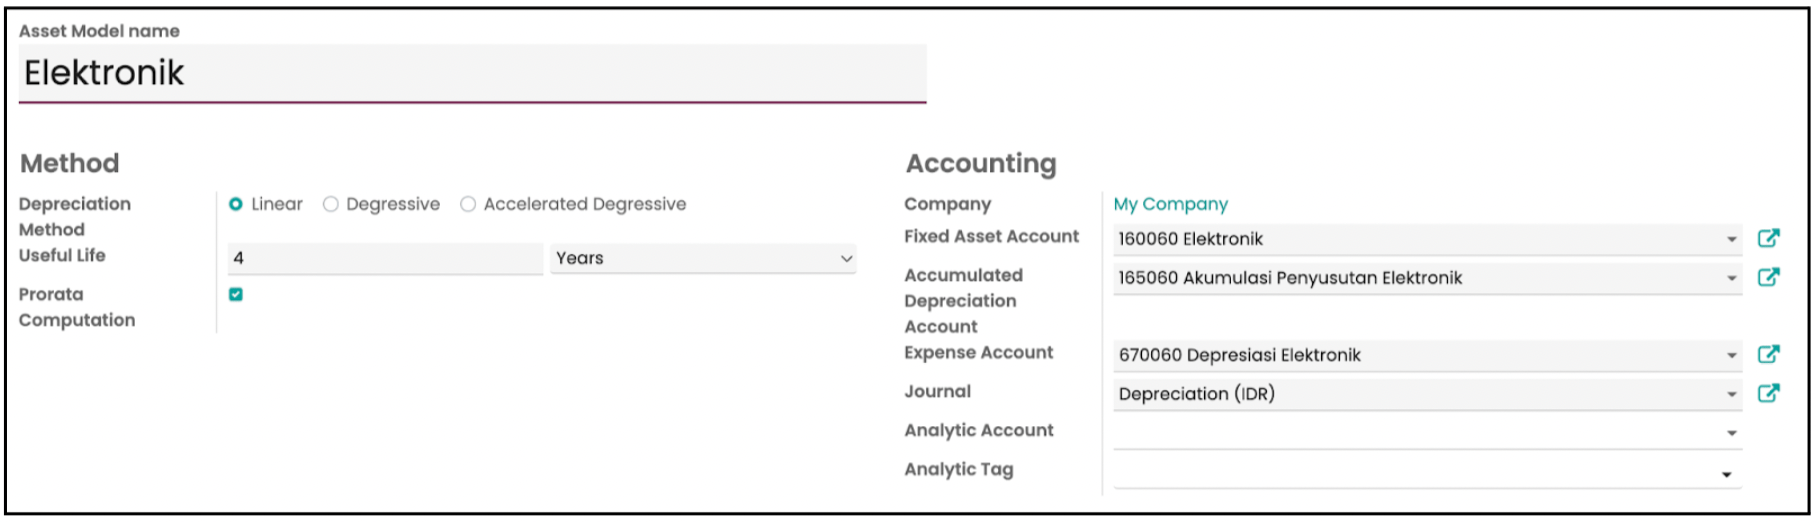 Odoo Accounting Module Configuration Reconciliations Models